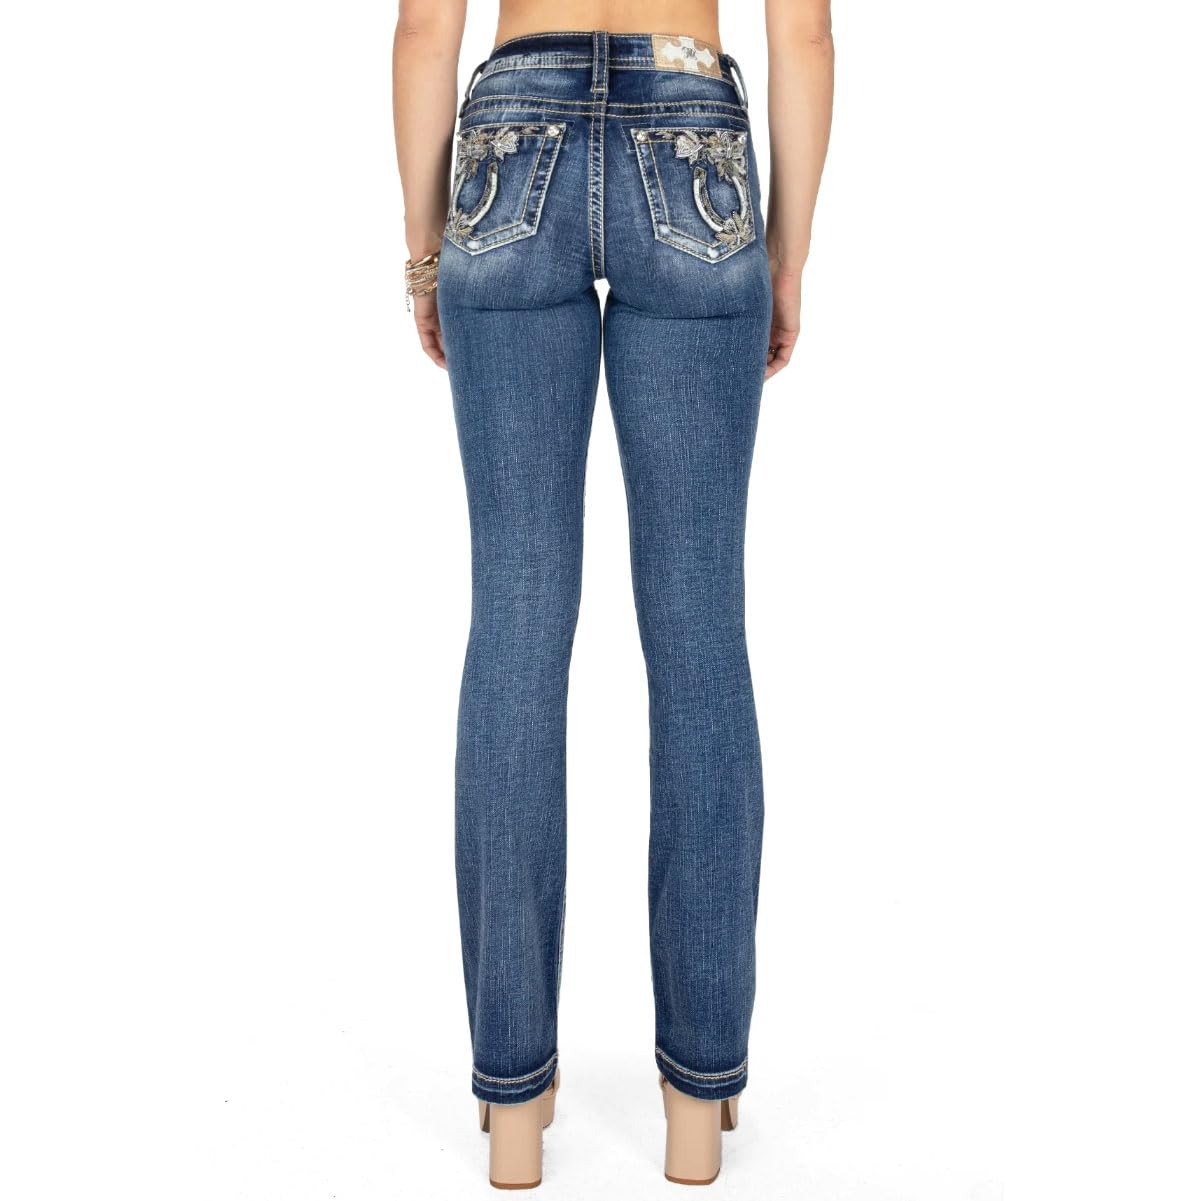 Missme jeans – Make you the center of attention插图3